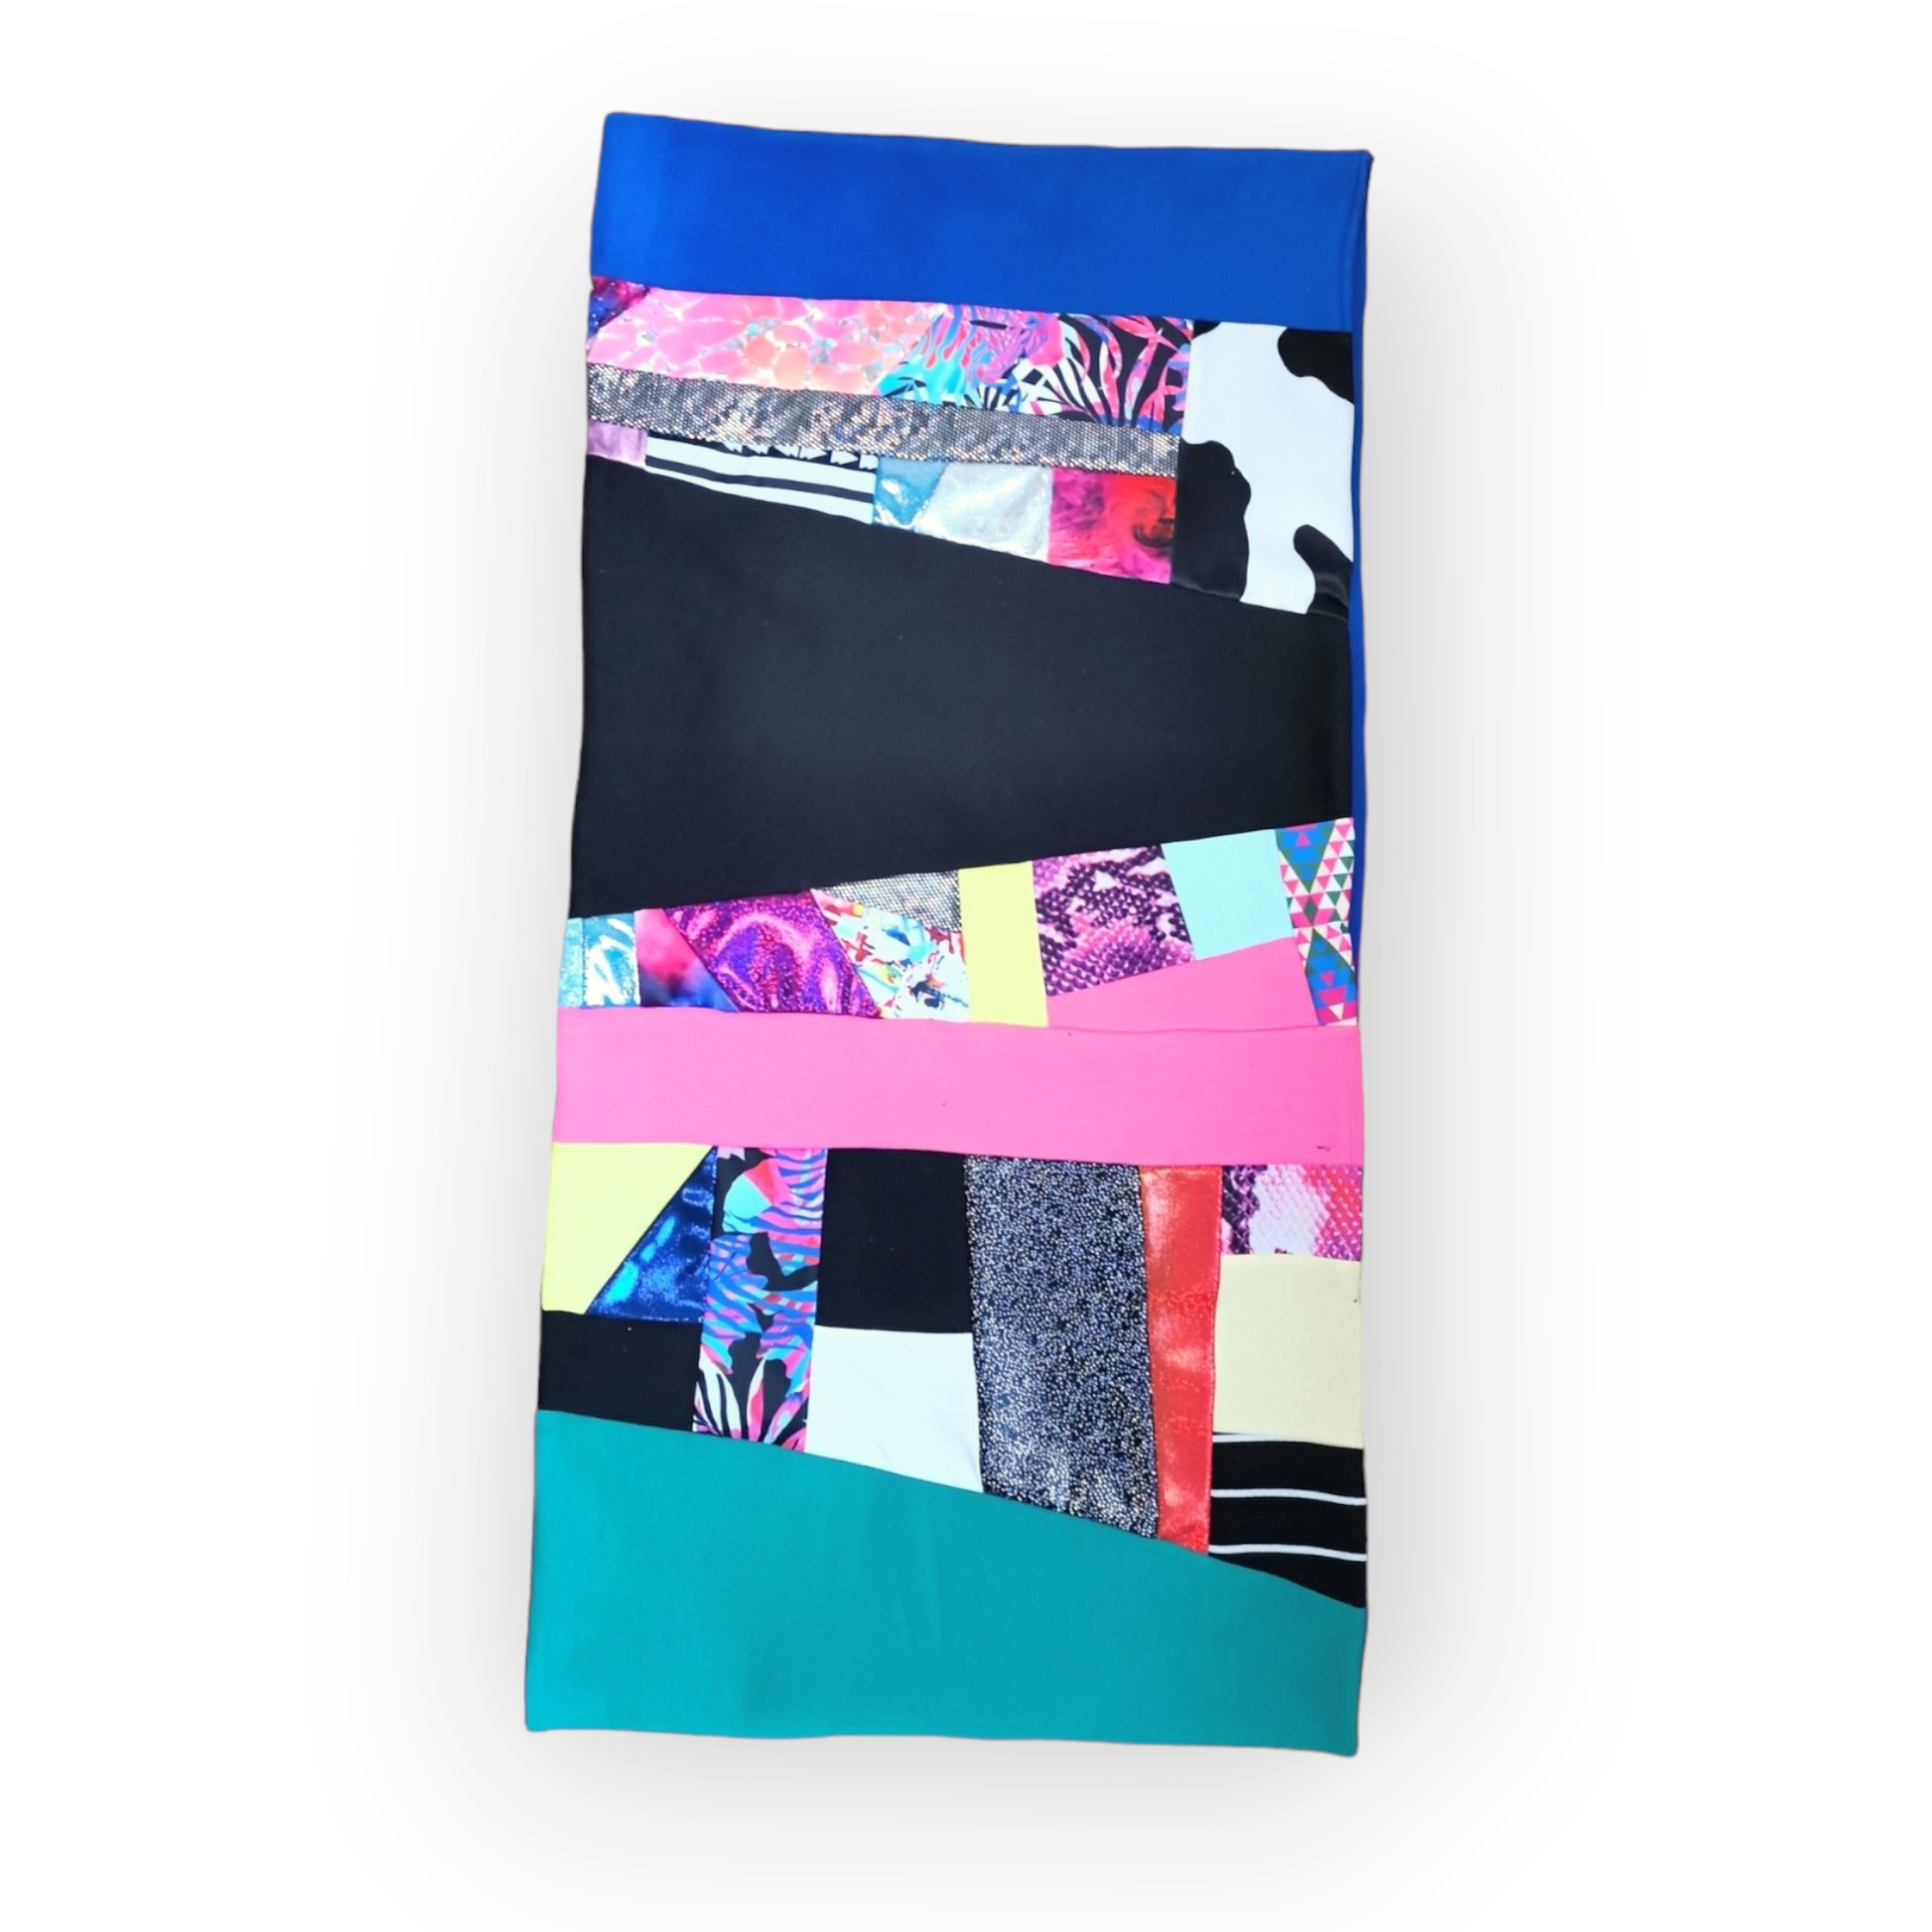 Large circular scarf made from recycled scrap fabrics.  Lined in blue fleece and including bright, printed, multi coloured patchwork panels and large colour blocks in turquoise, pink, black and blue. Pictured flat on white background. 